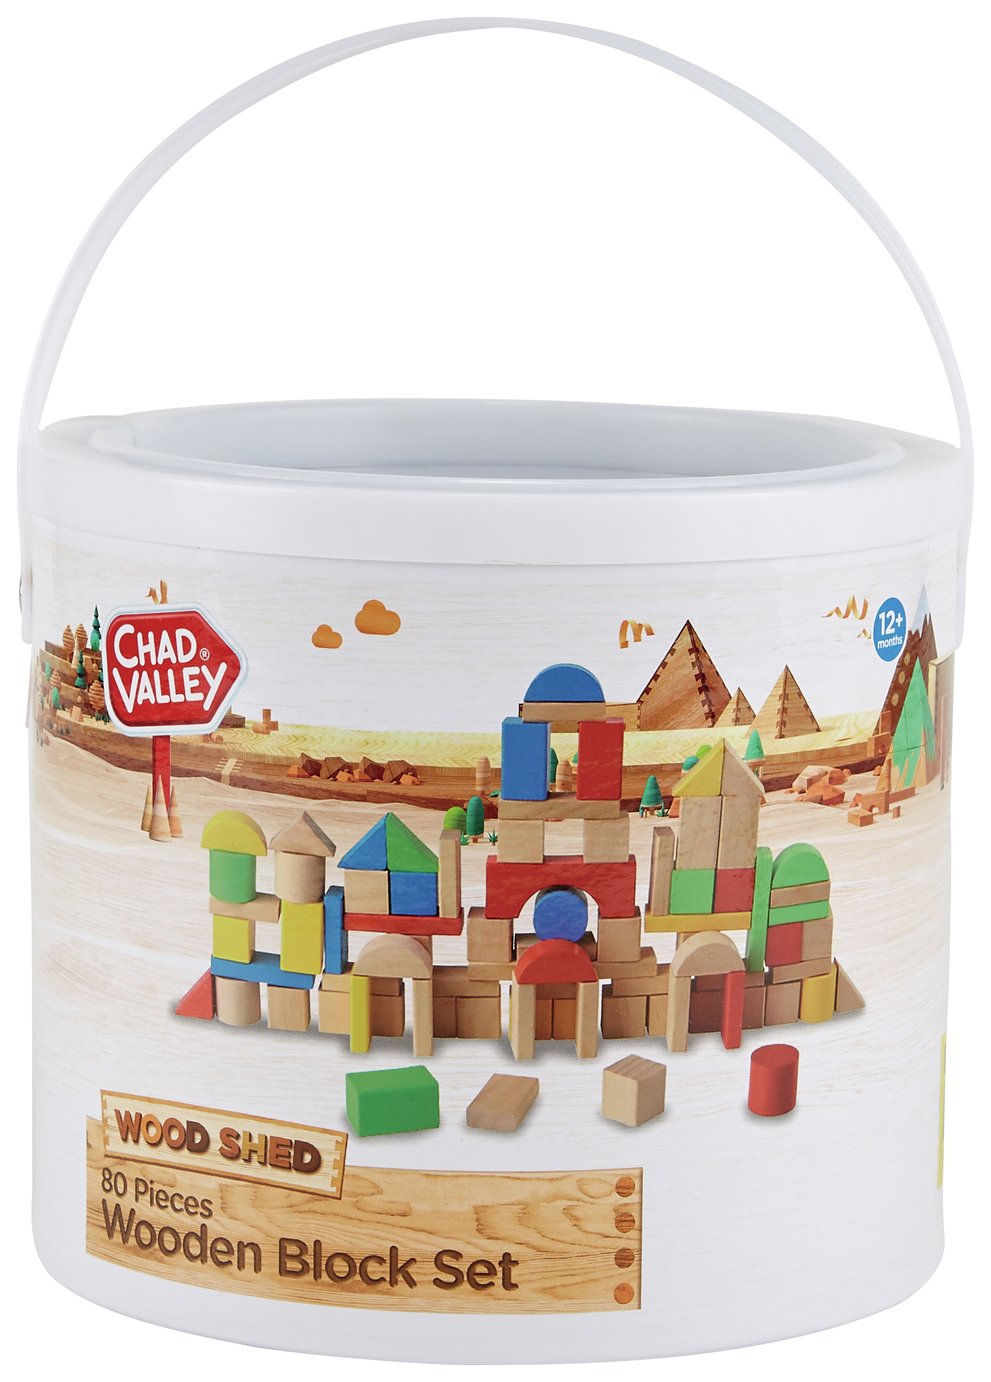 Chad Valley PlaySmart Wooden Block Set Review